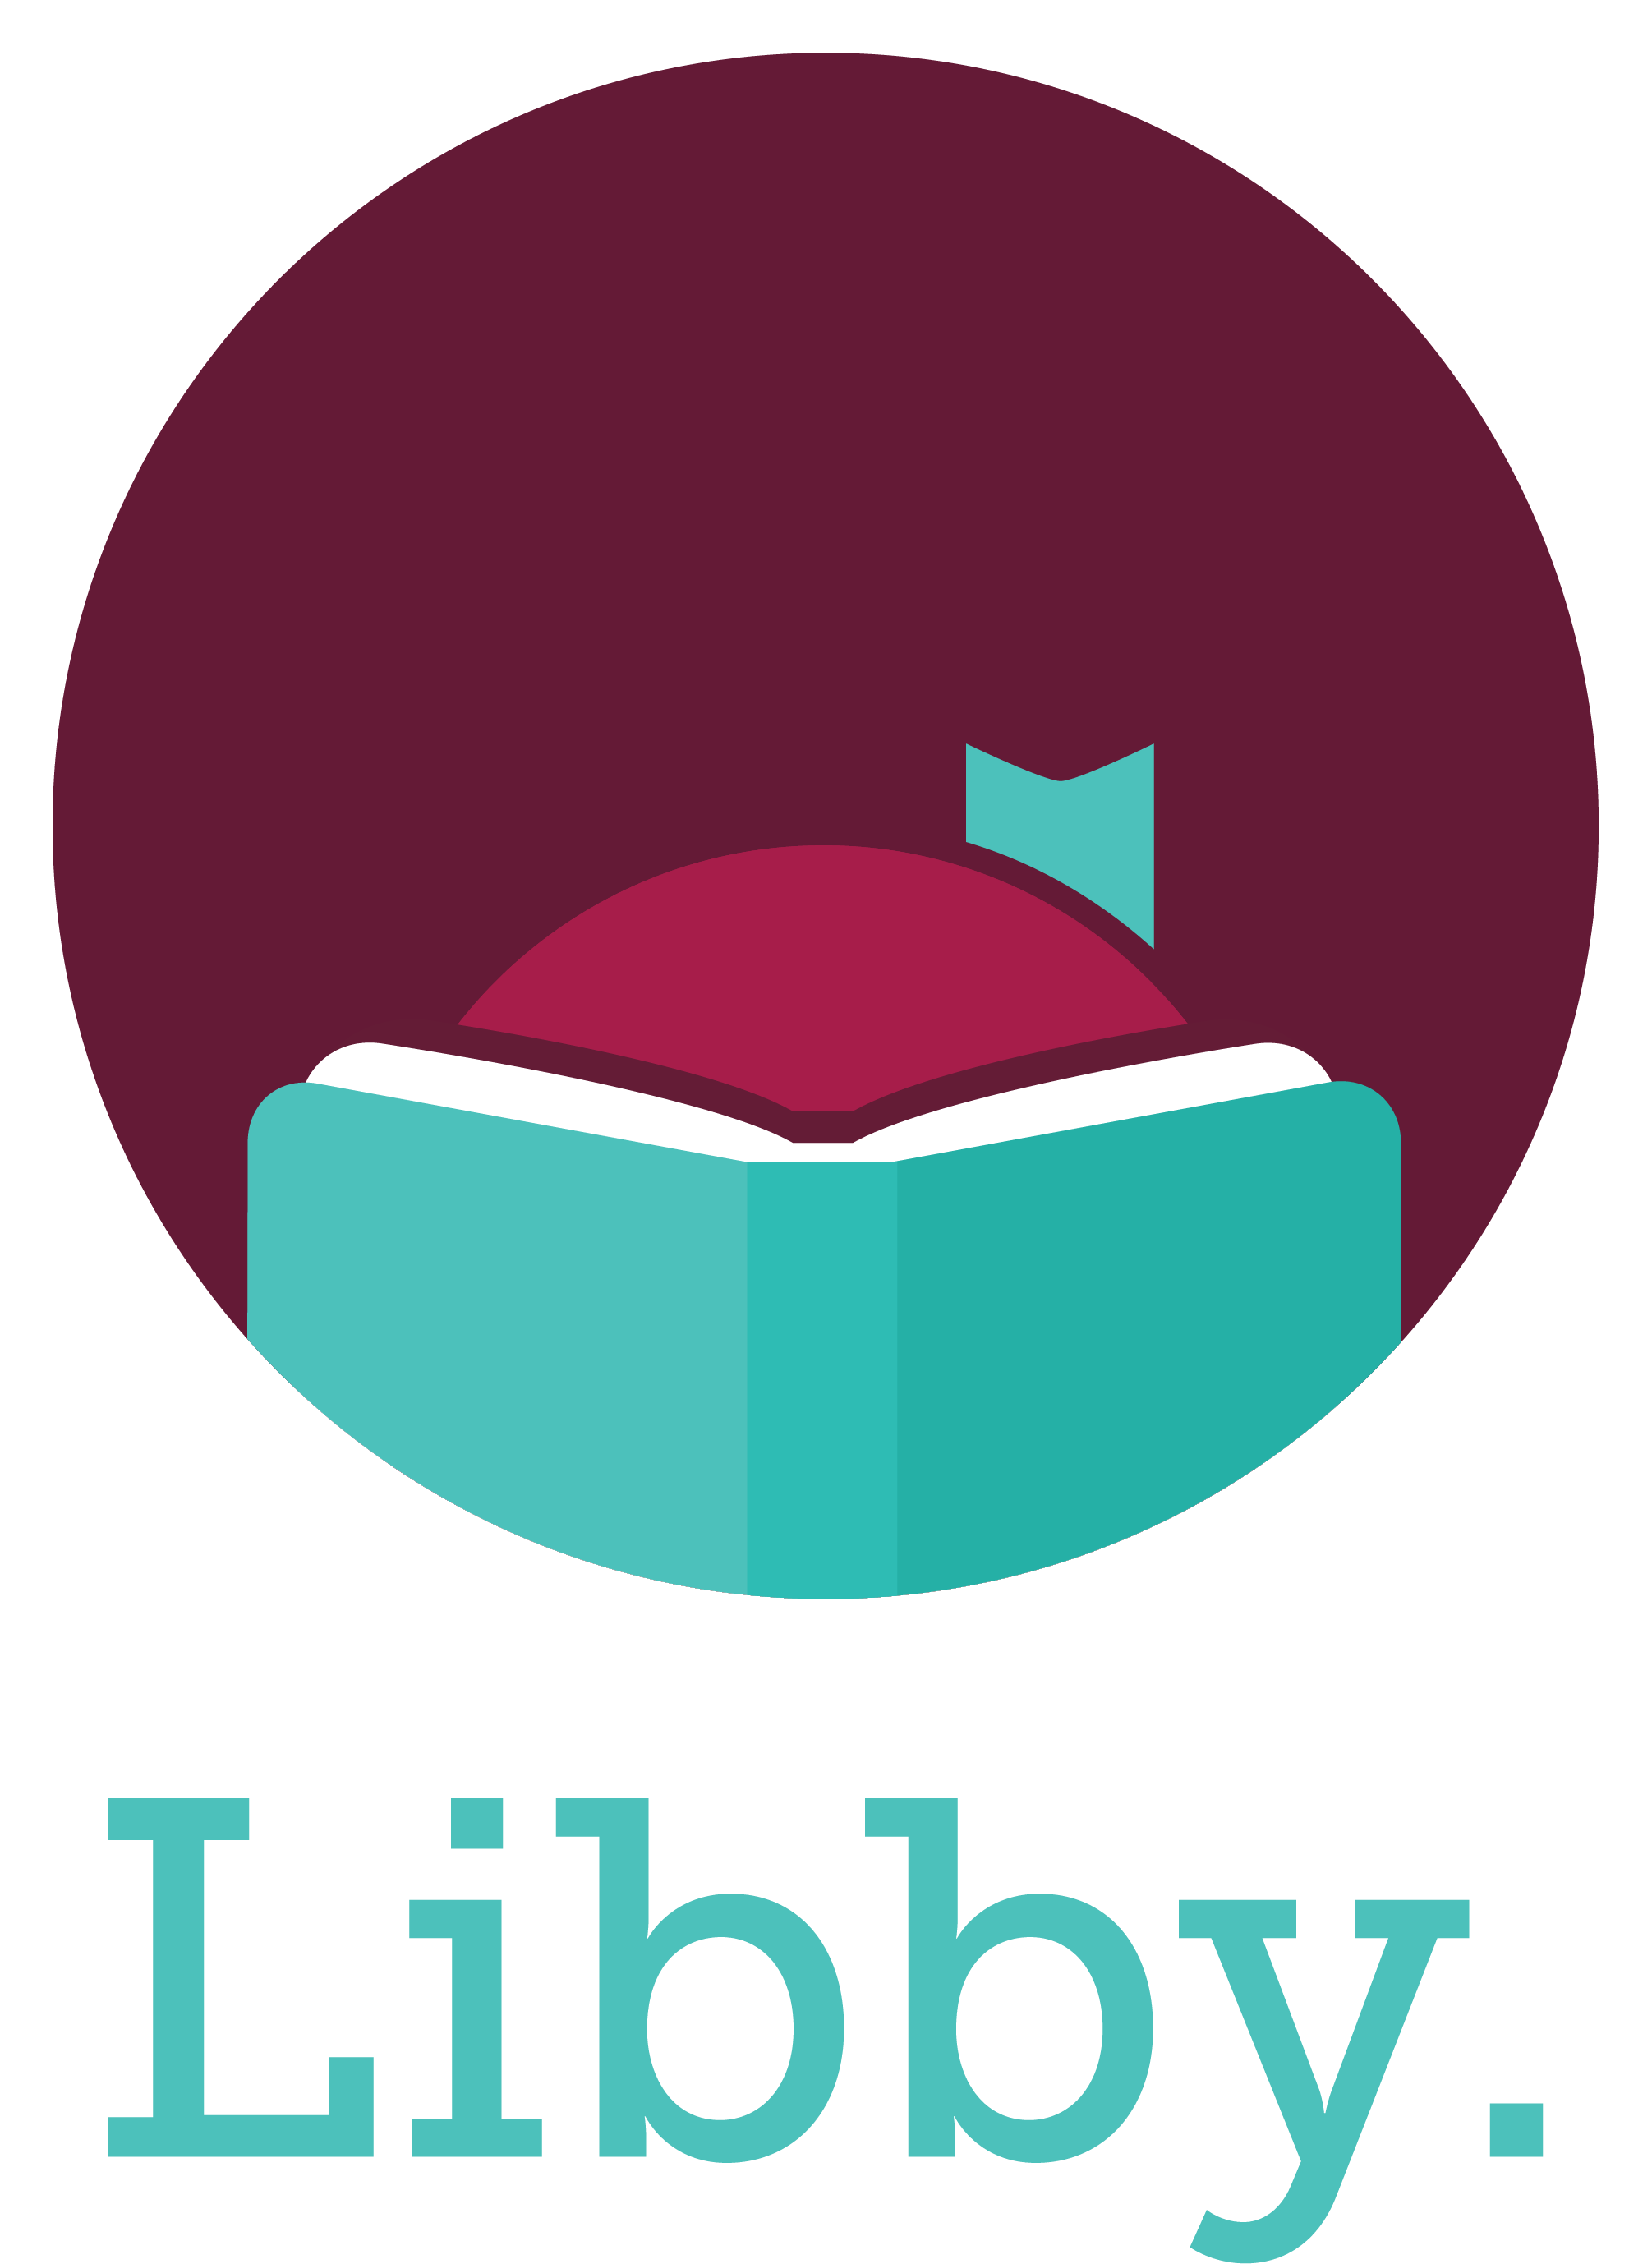 Link to the digital reading service platform from Overdrive, Libby.
